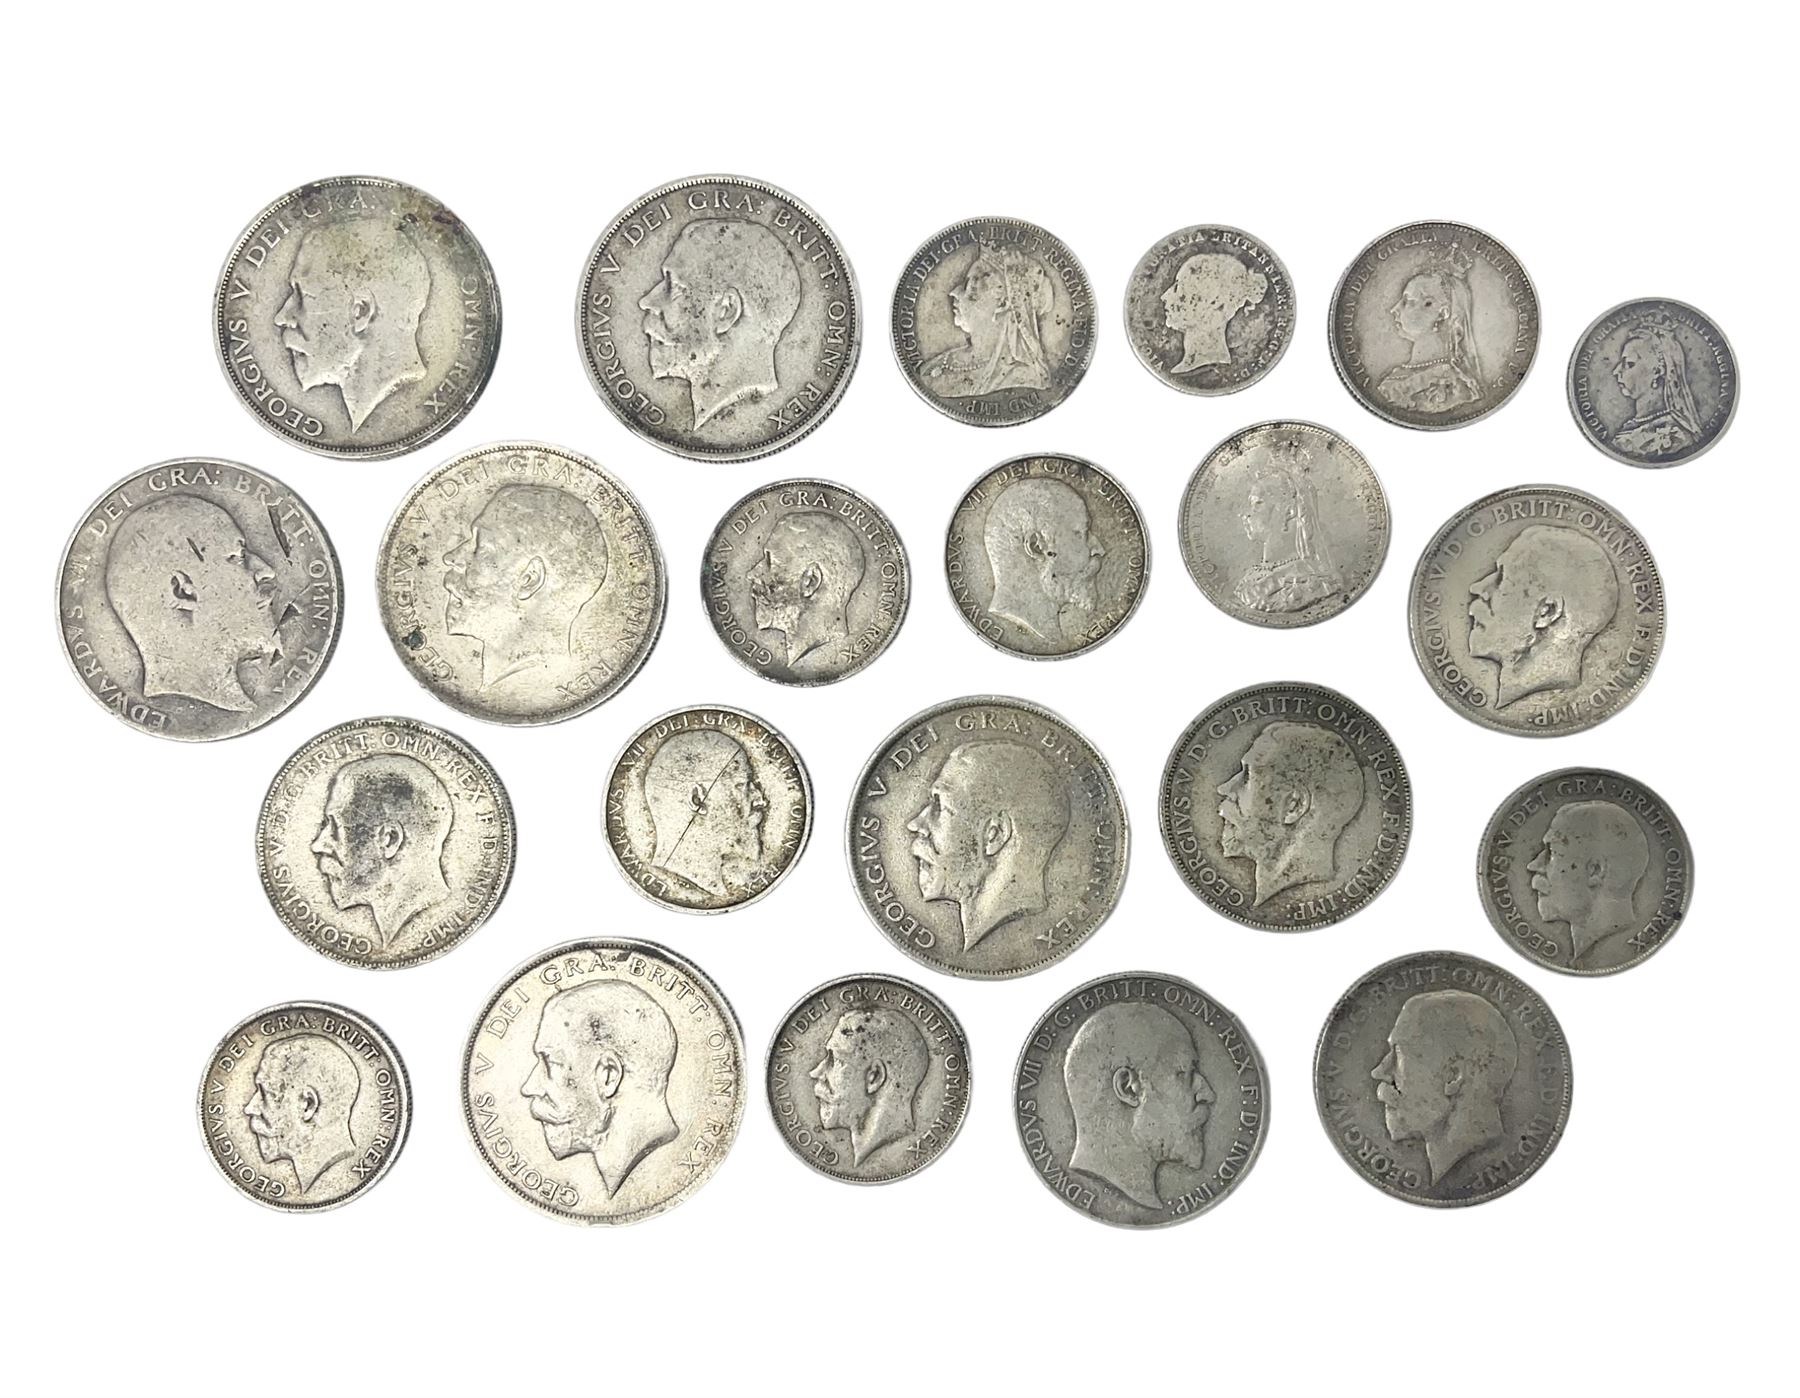 Approximately 195 grams of Great British pre-1920 silver coins